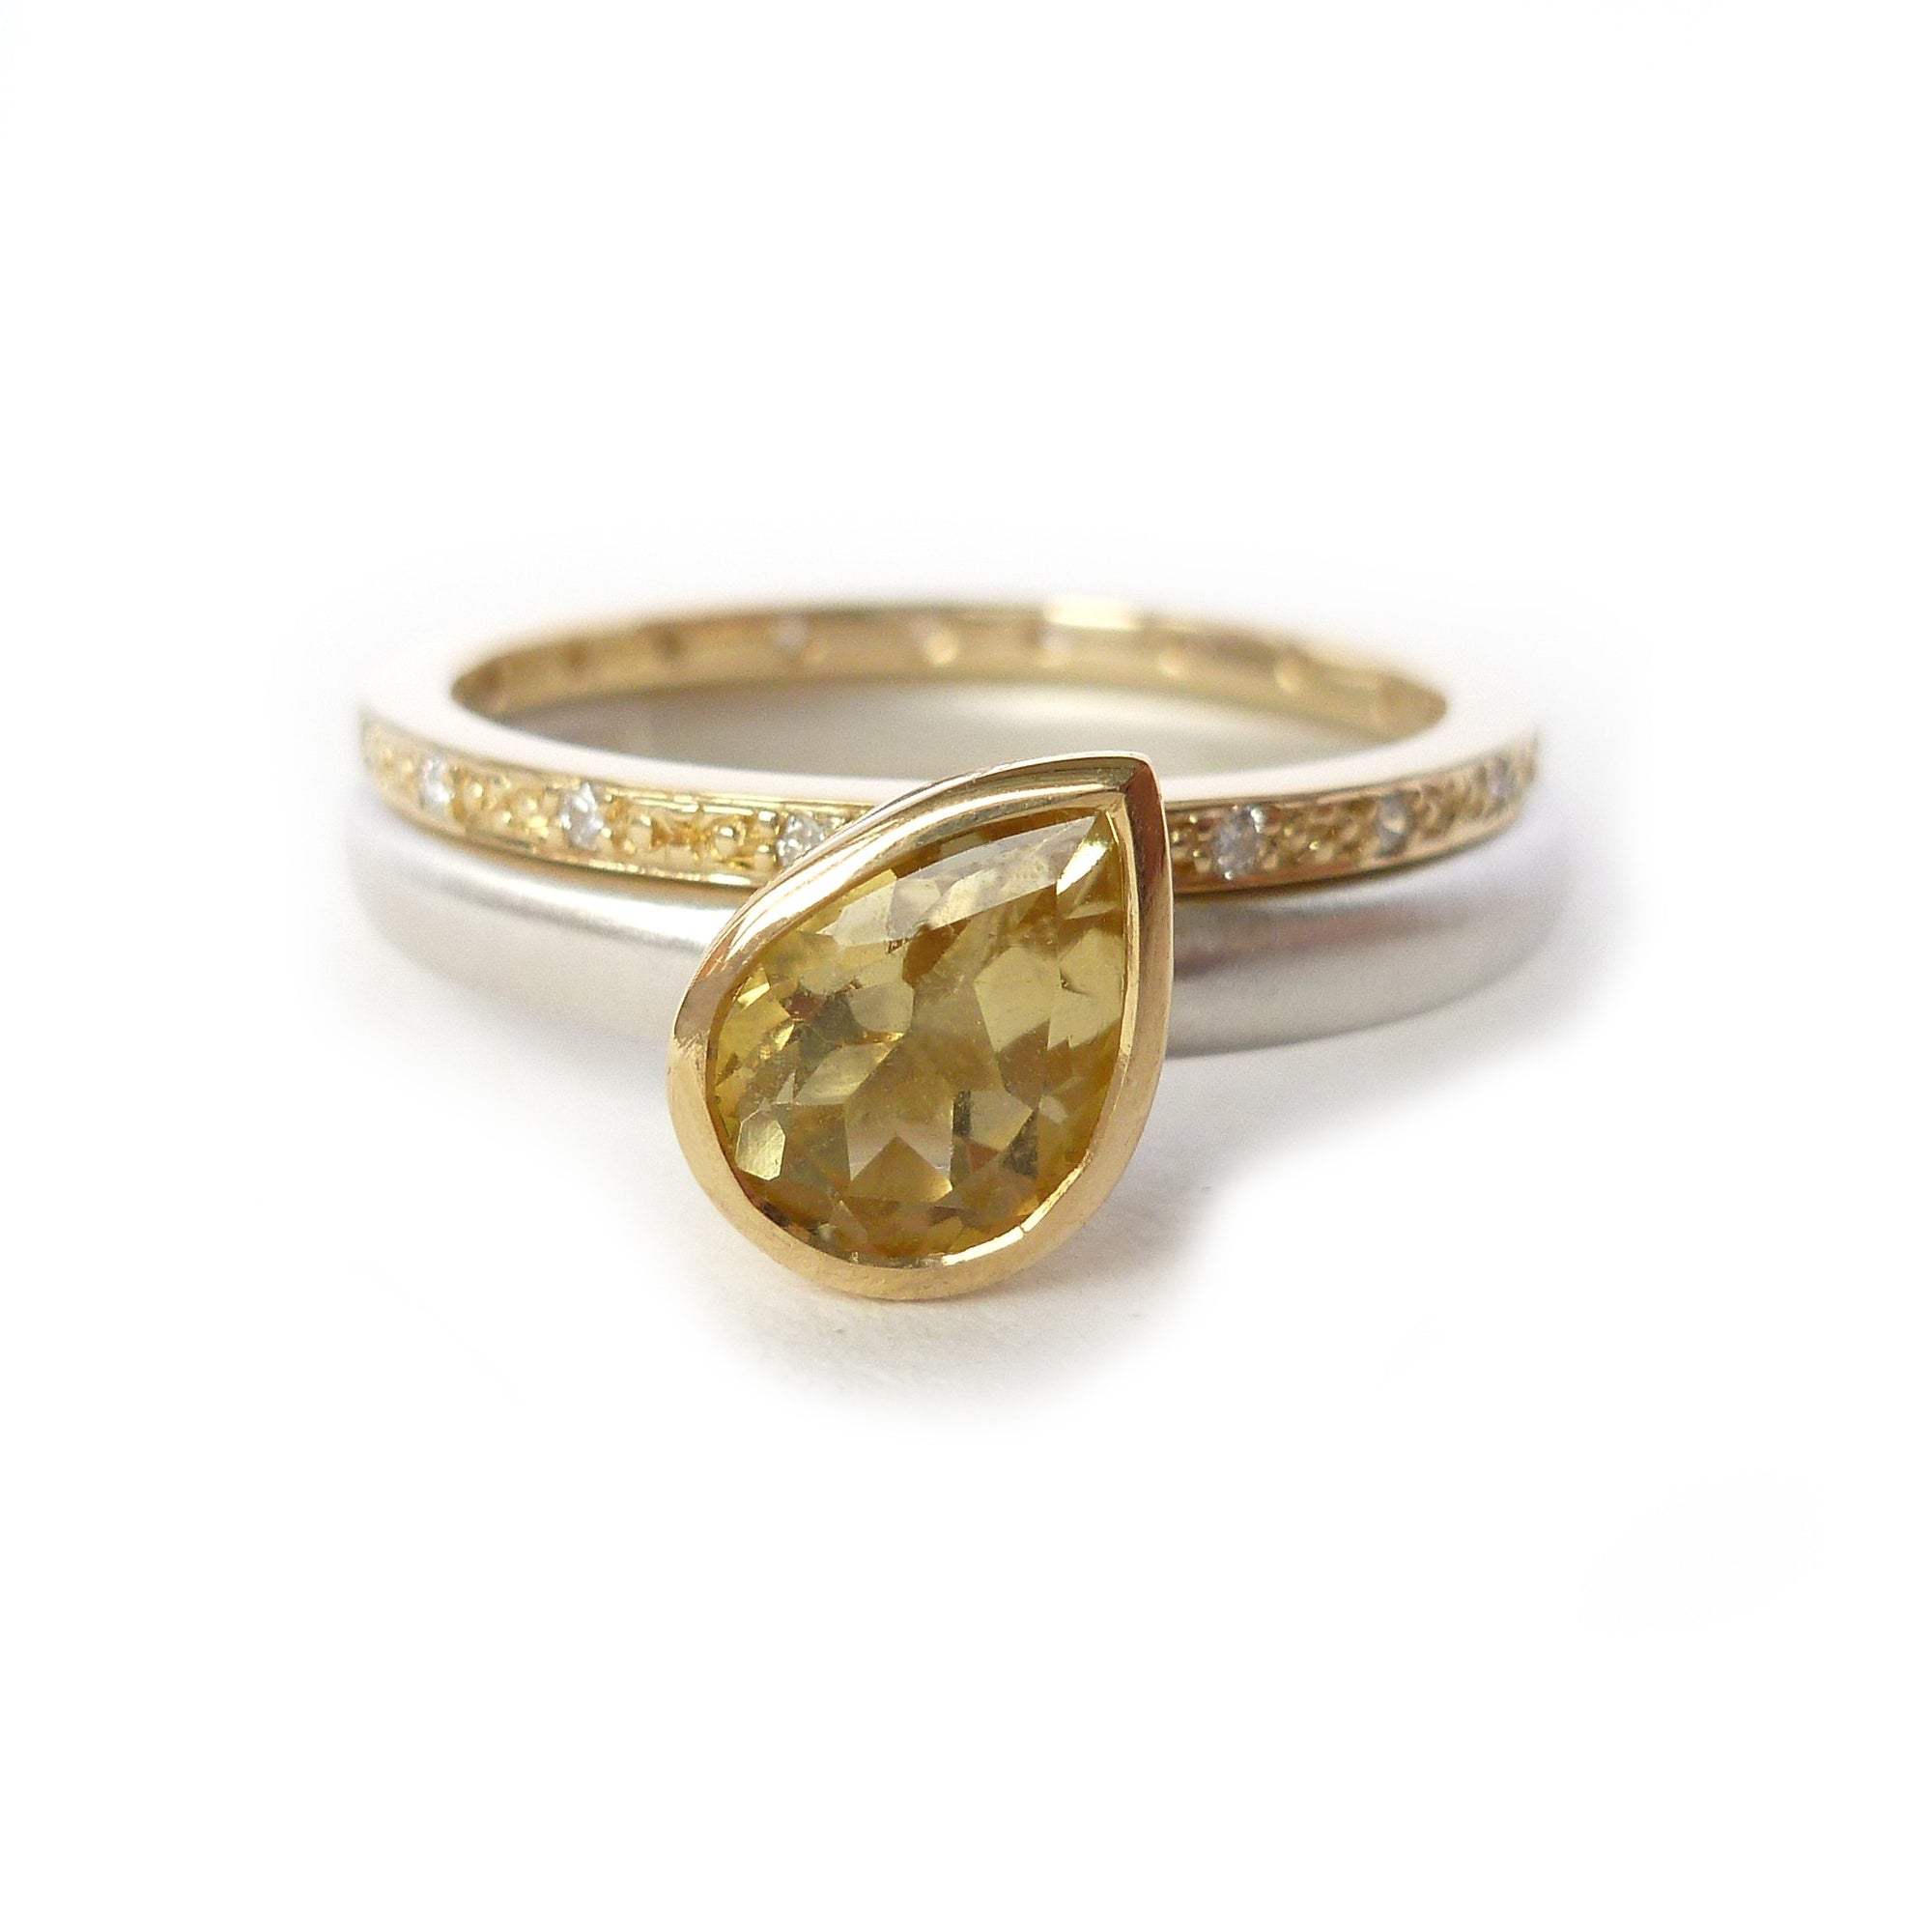 Silver, 18ct gold and yellow sapphire ring